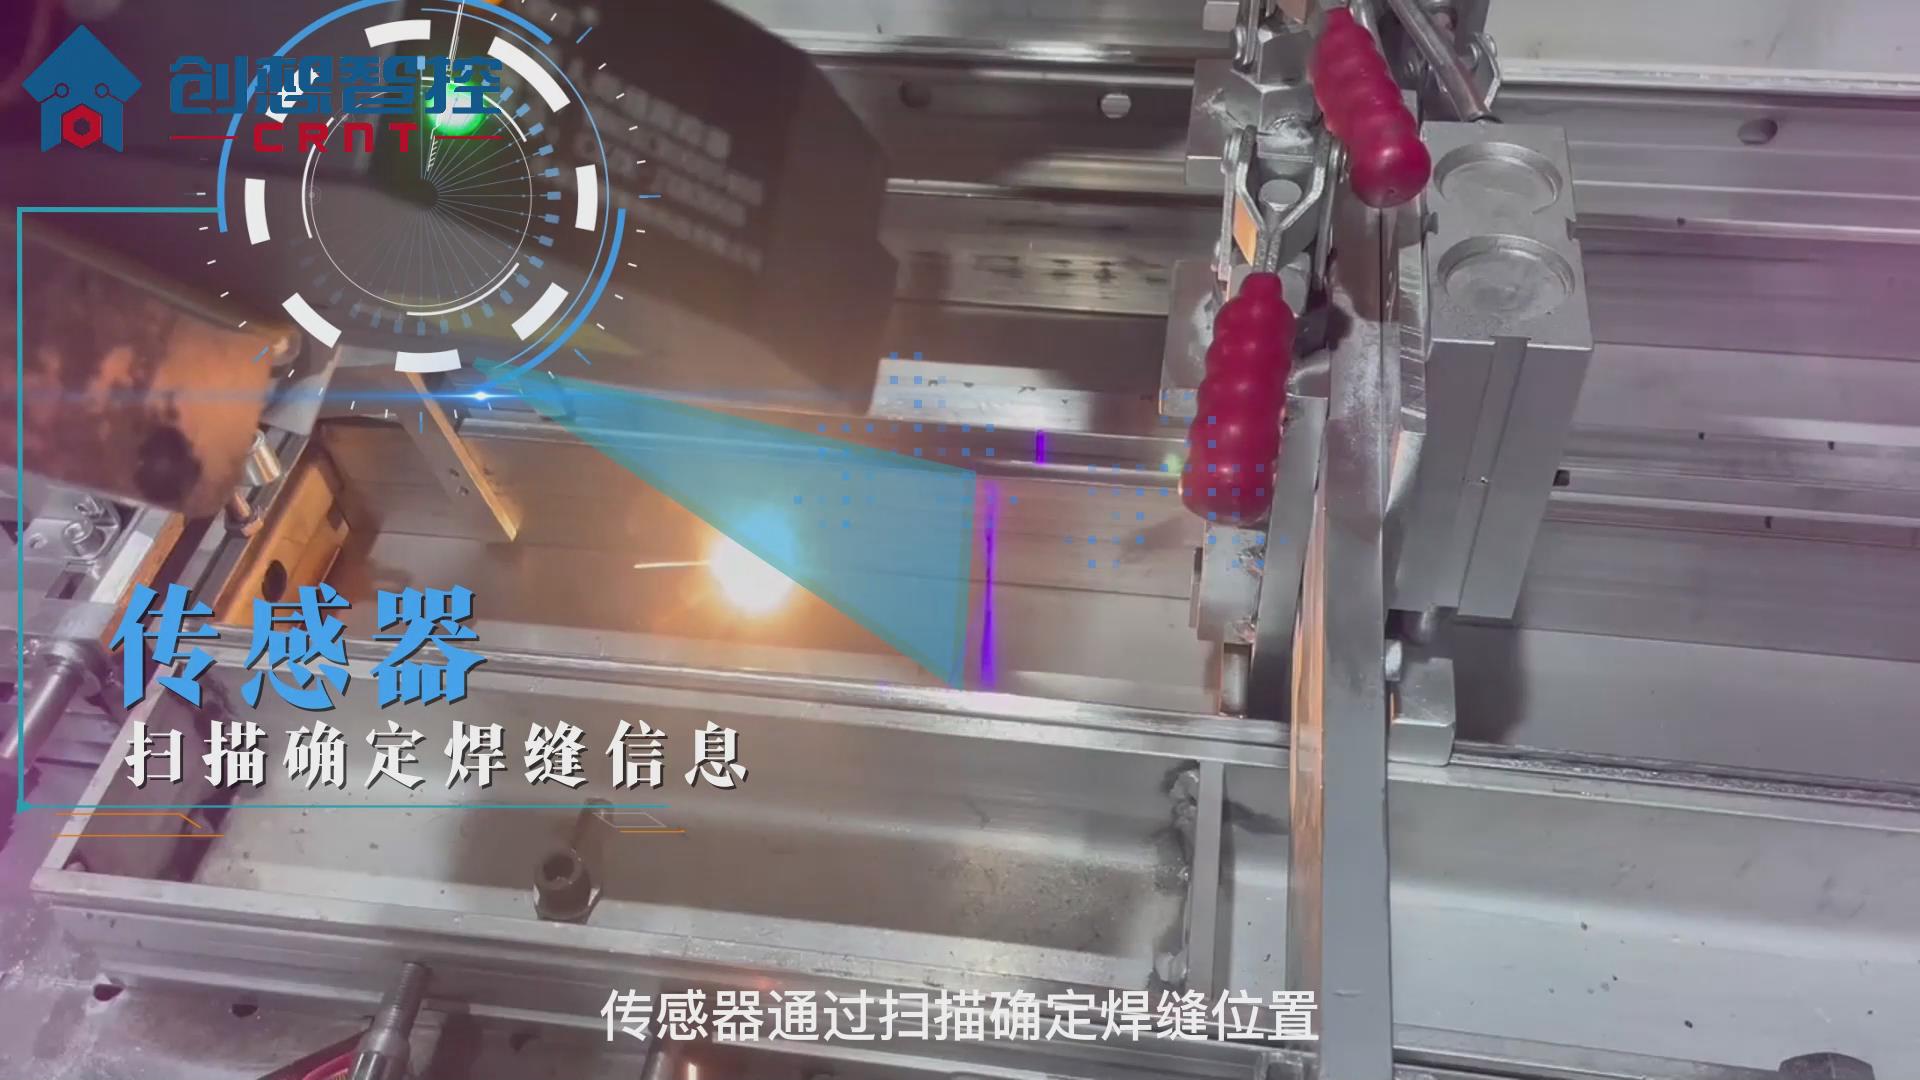 Application of Chuangxiang Weld Seam Tracking Sensor in Achieving Fully Automated Welding with Chaifu Robots